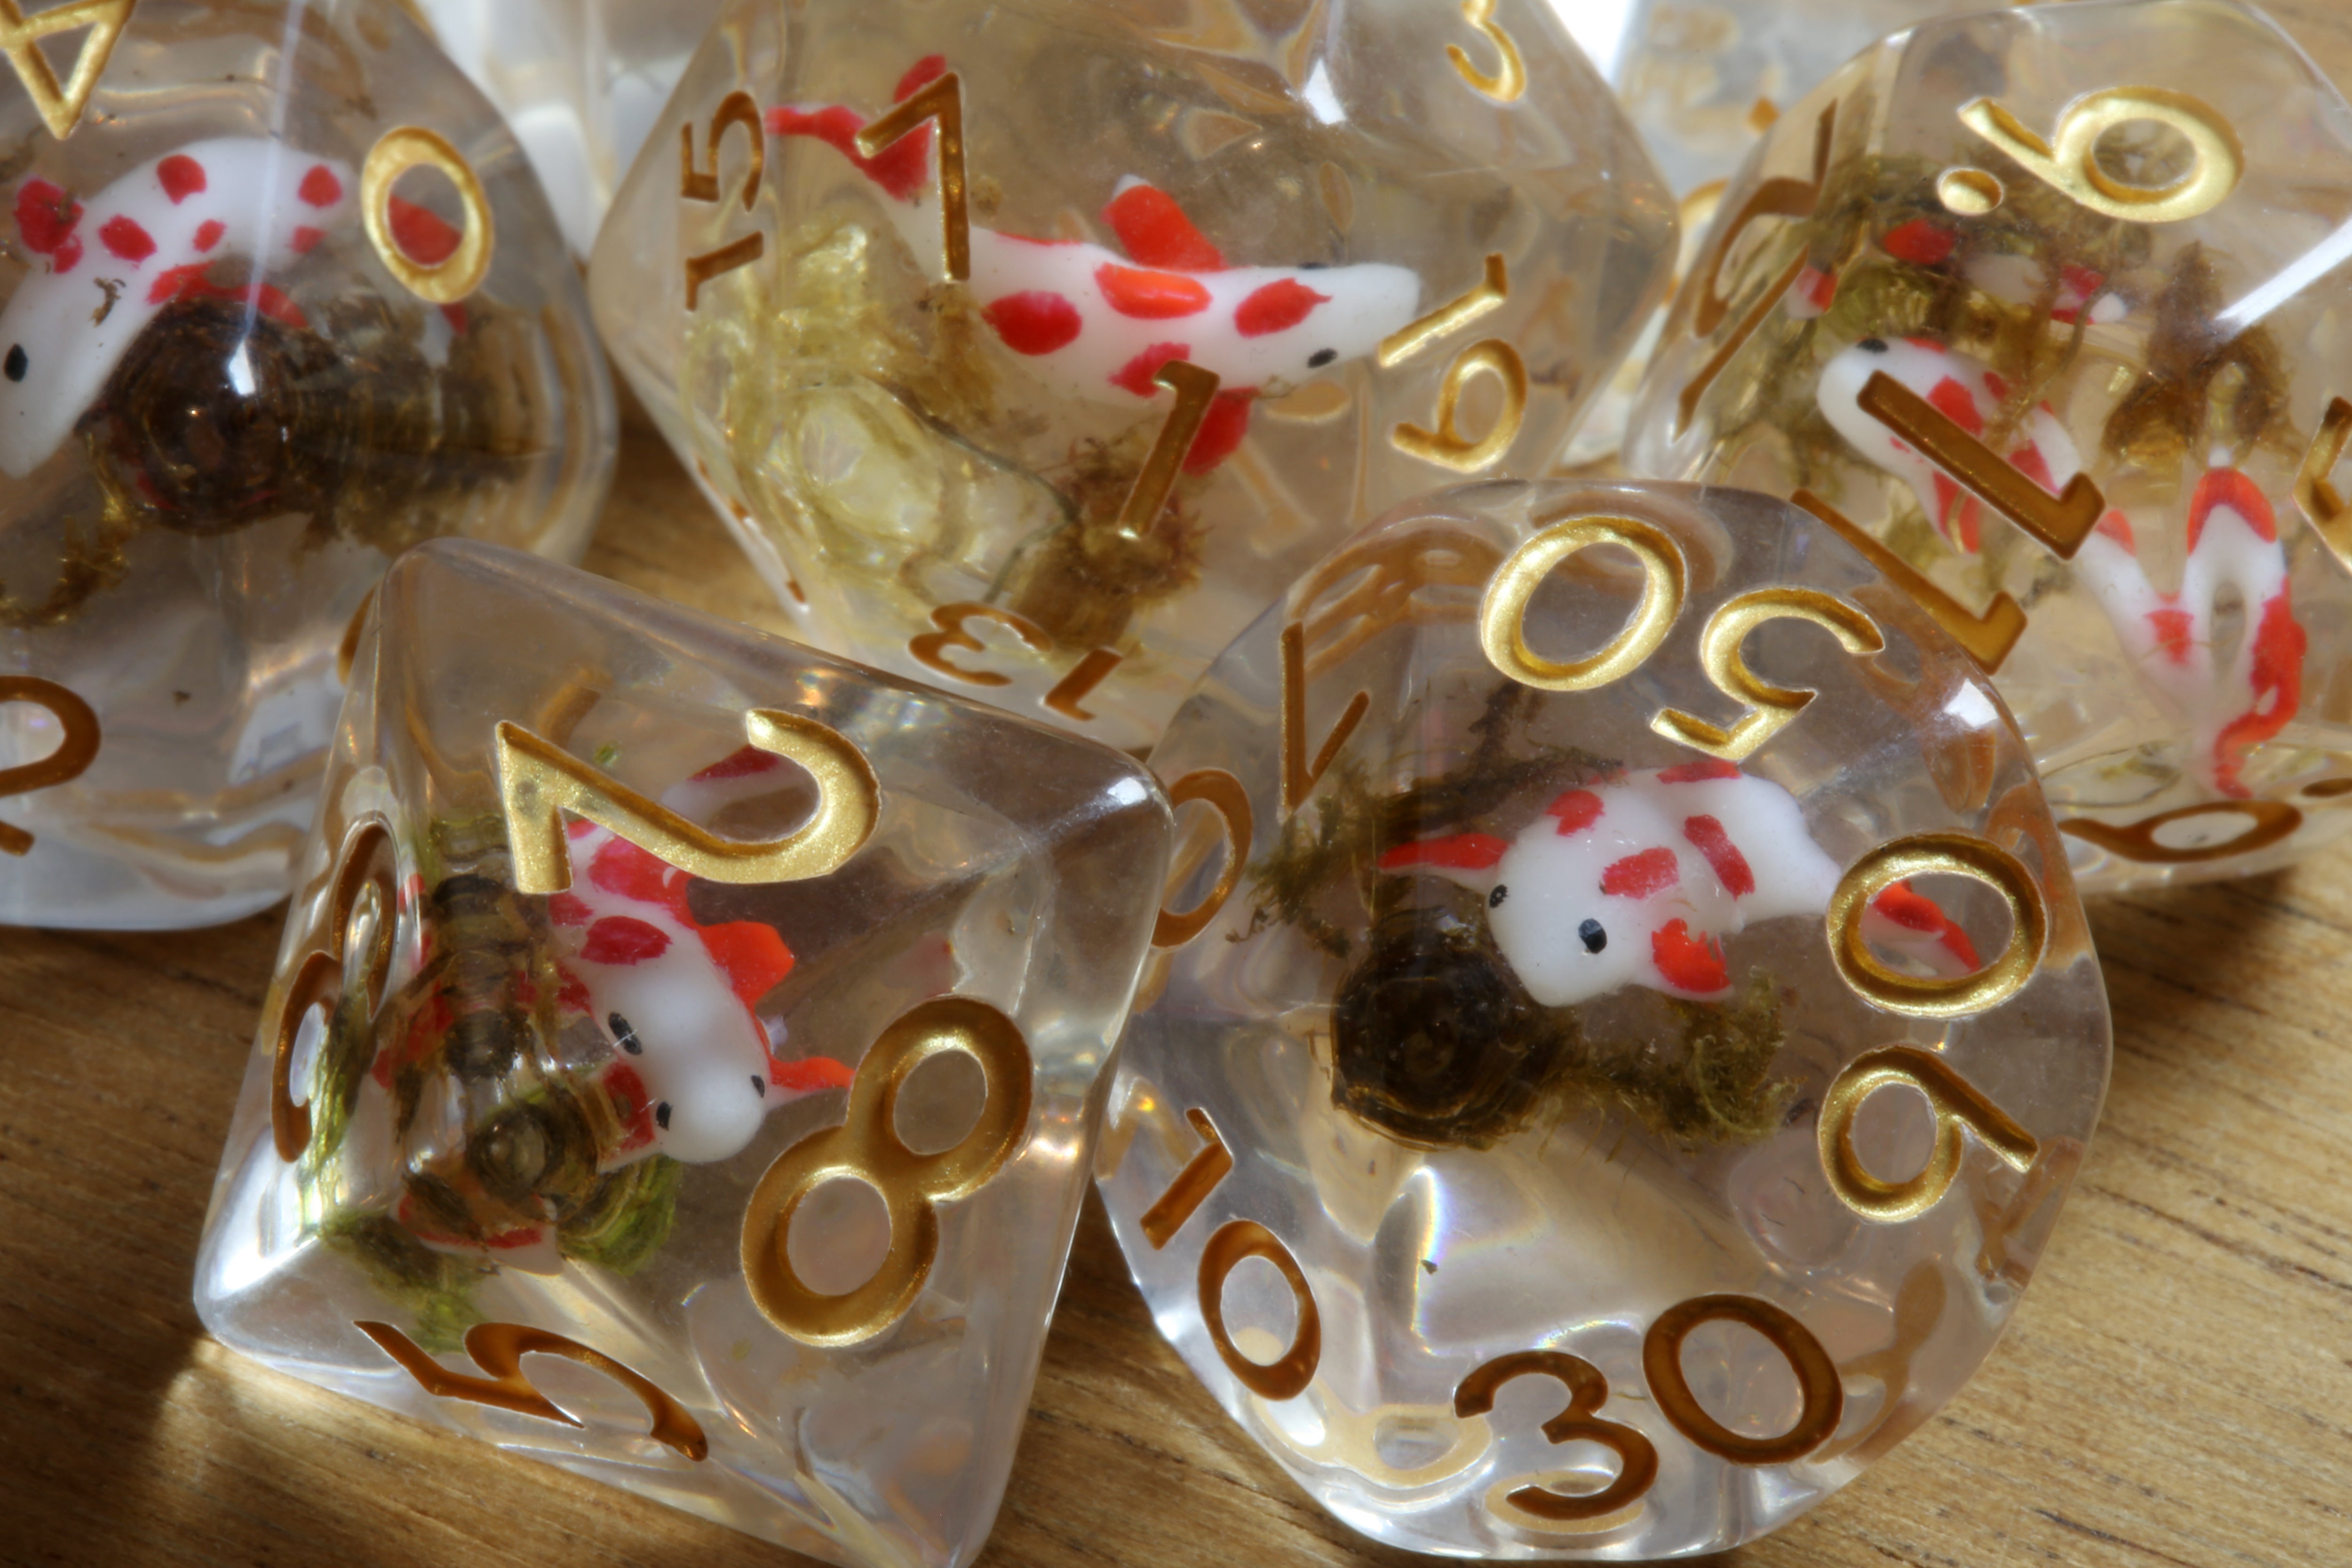 Koi pond dice set - Small fish and moss - The Wizard's Vault